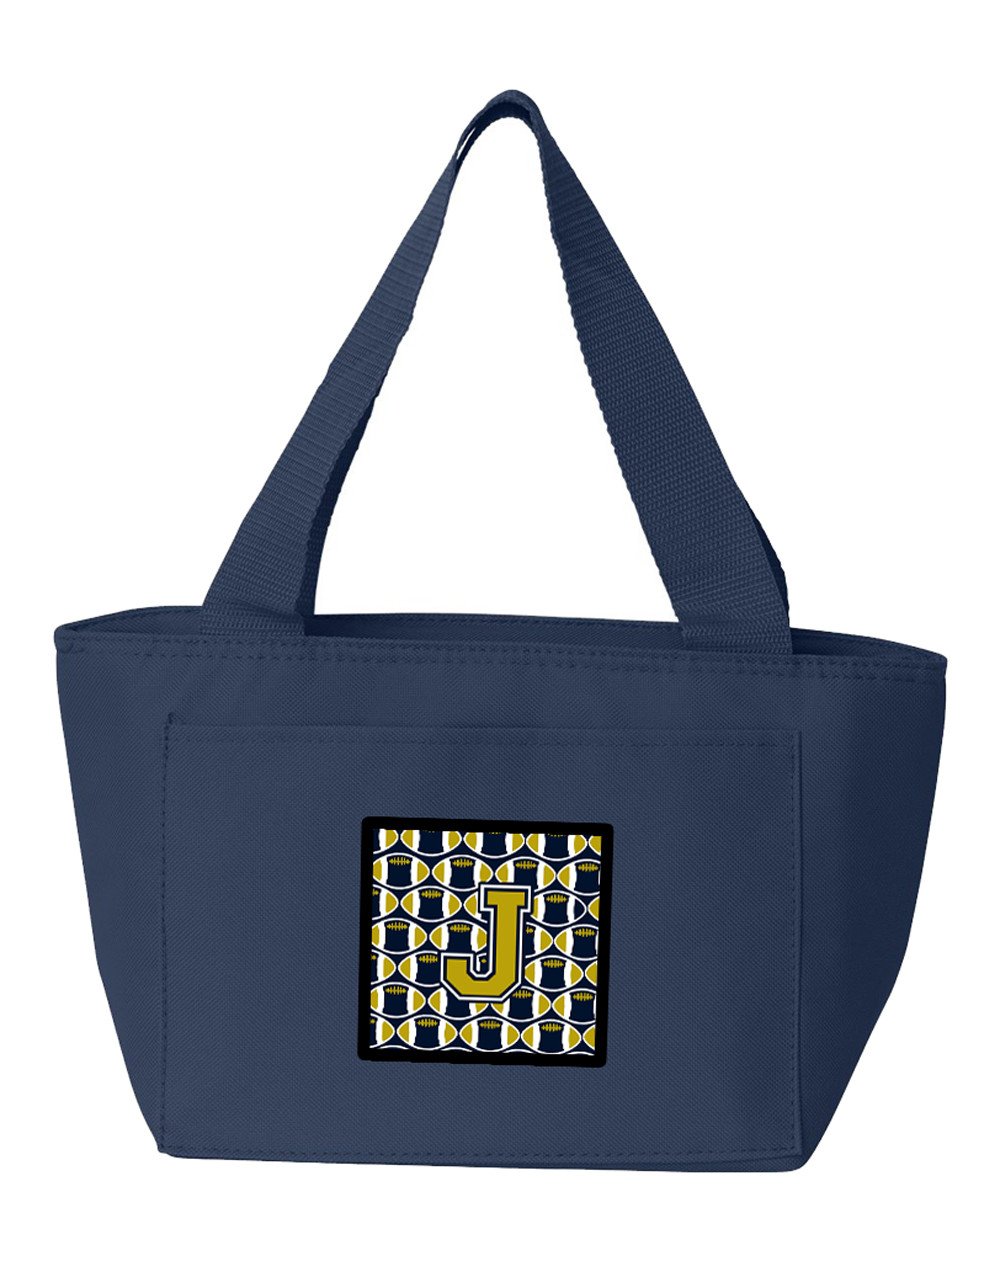 Letter J Football Blue and Gold Lunch Bag CJ1074-JNA-8808 by Caroline's Treasures